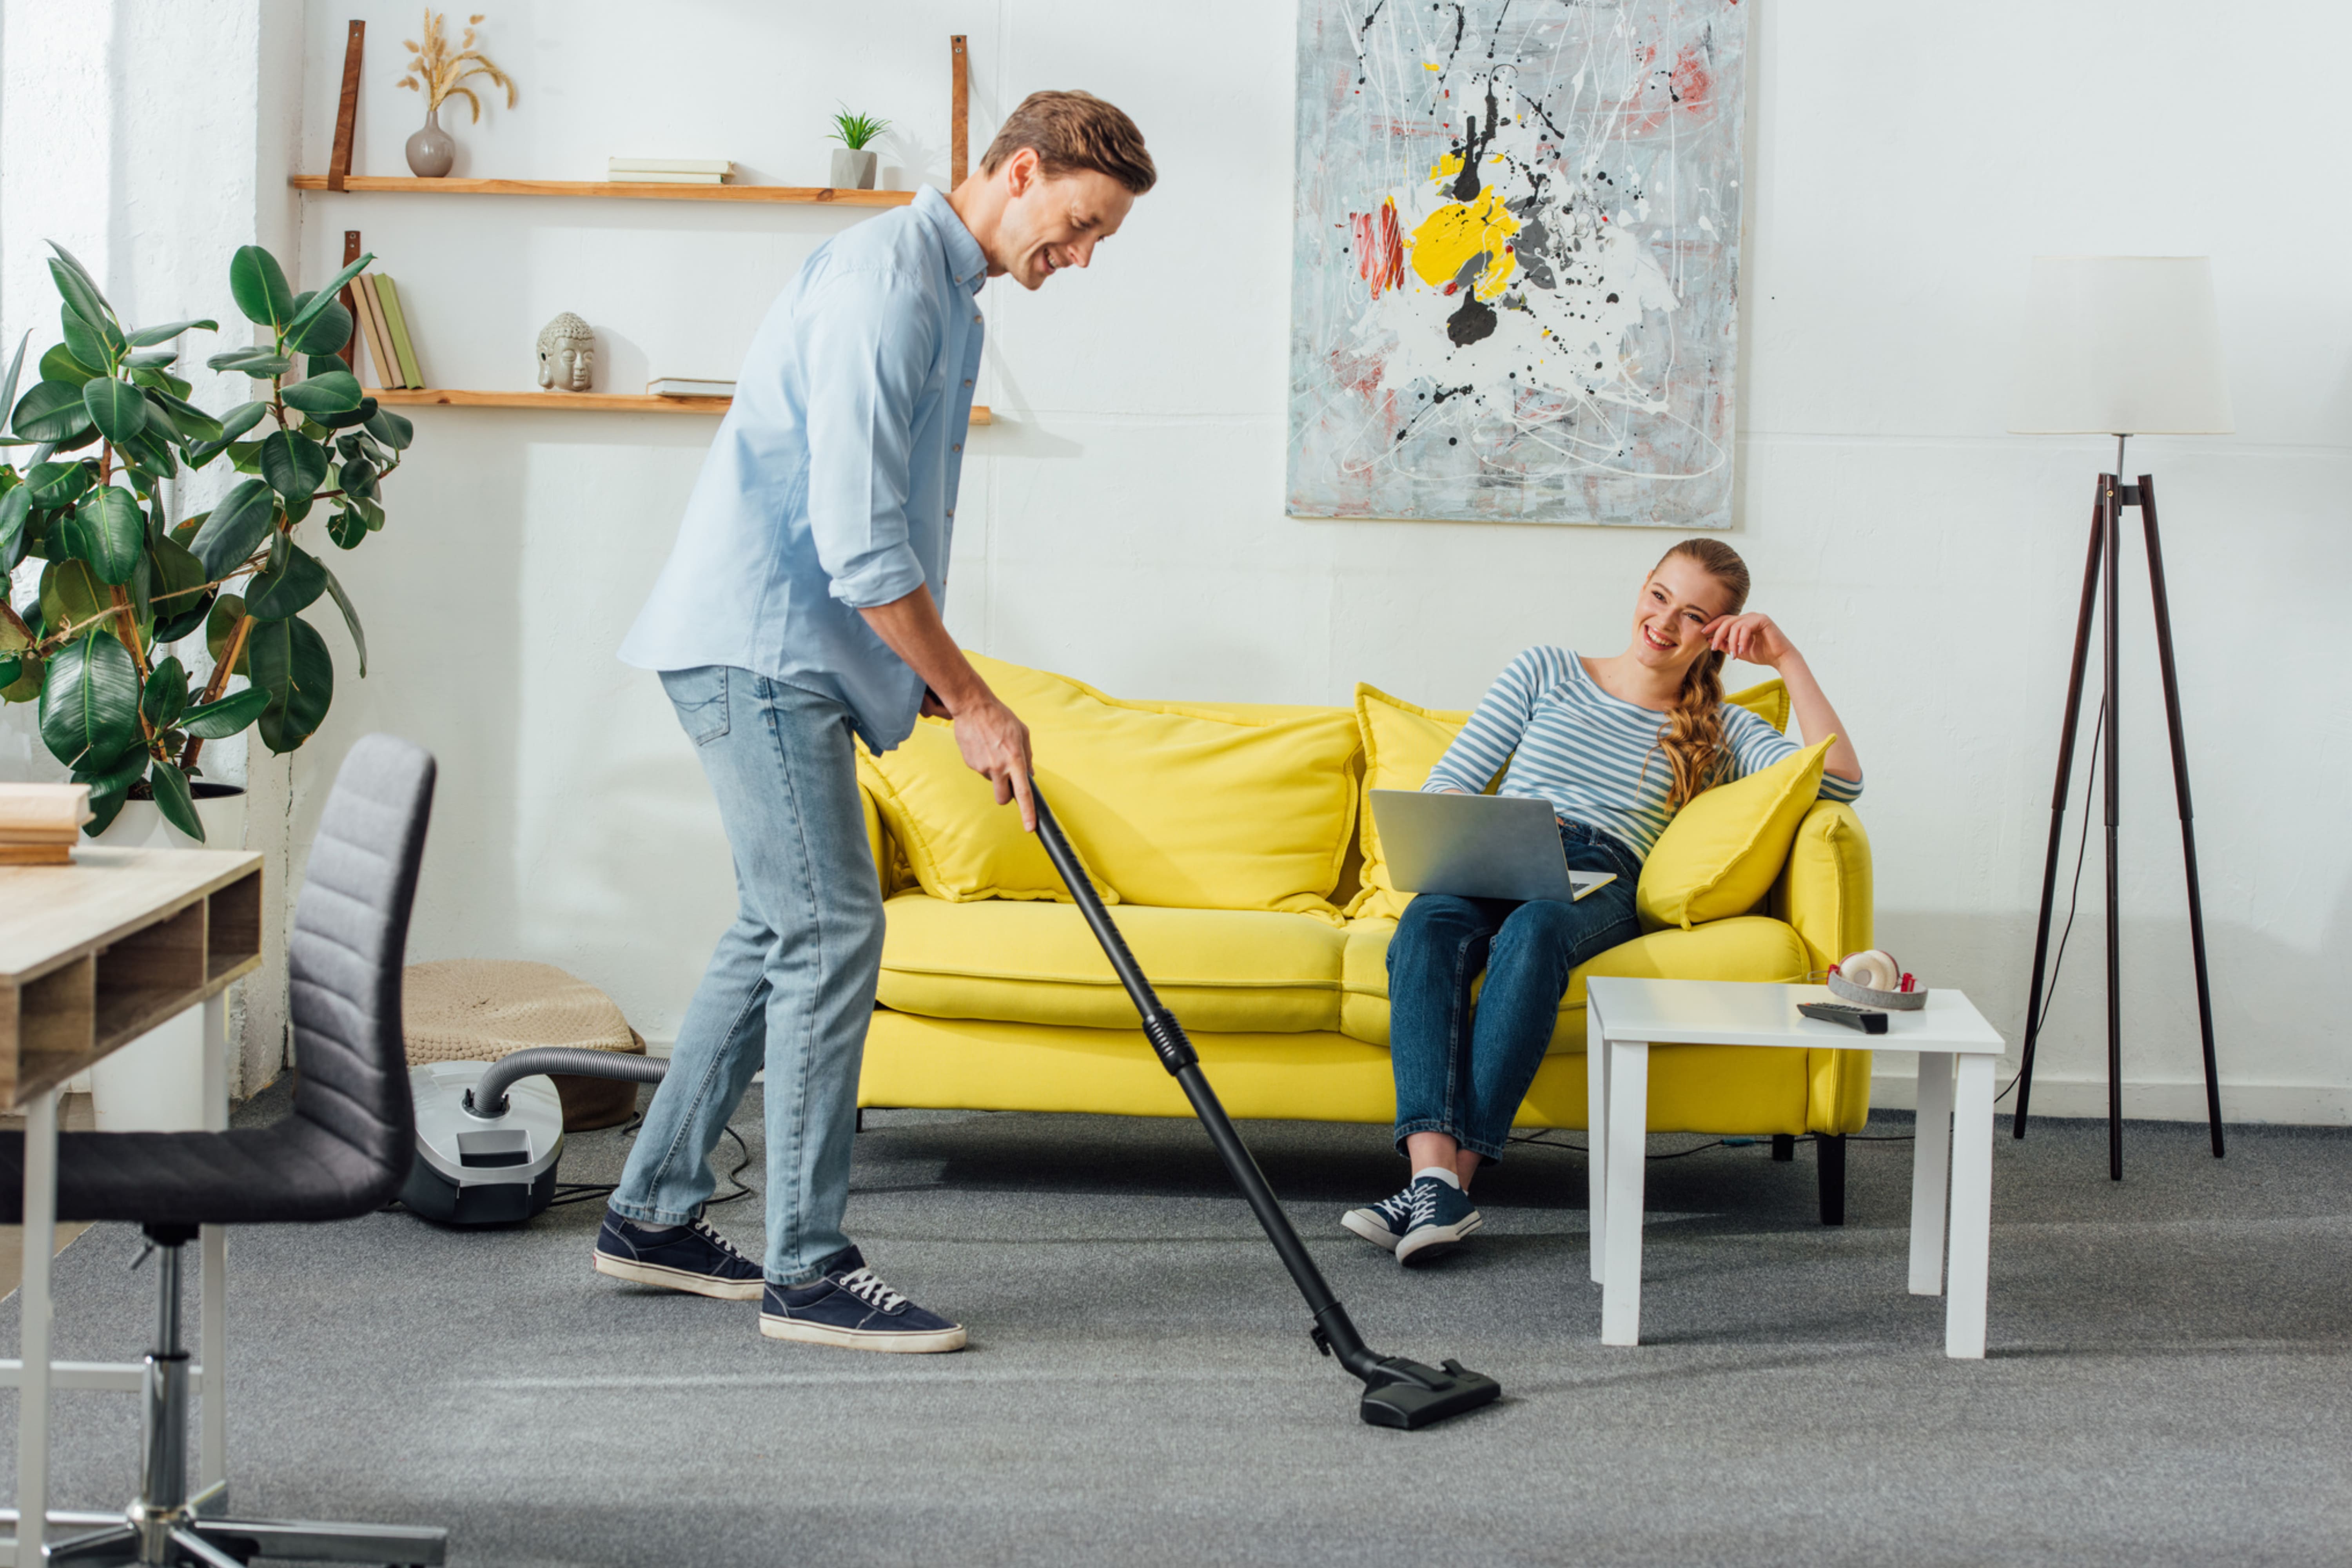 Deep Clean Your Vacation Rental With These Tips